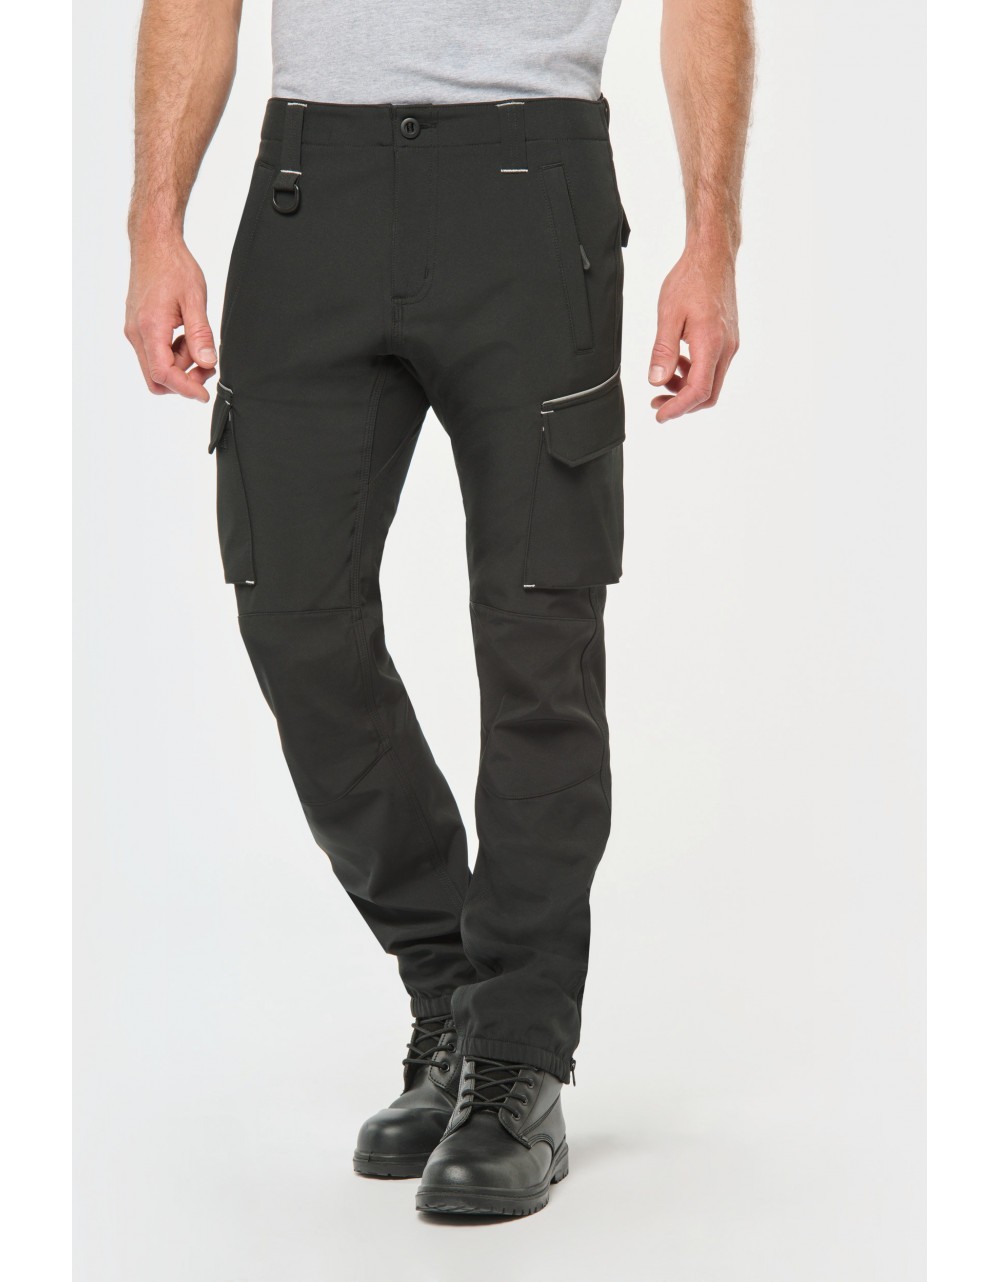 Mens workwear softshell trousers, WK750 WK - Designed to Work